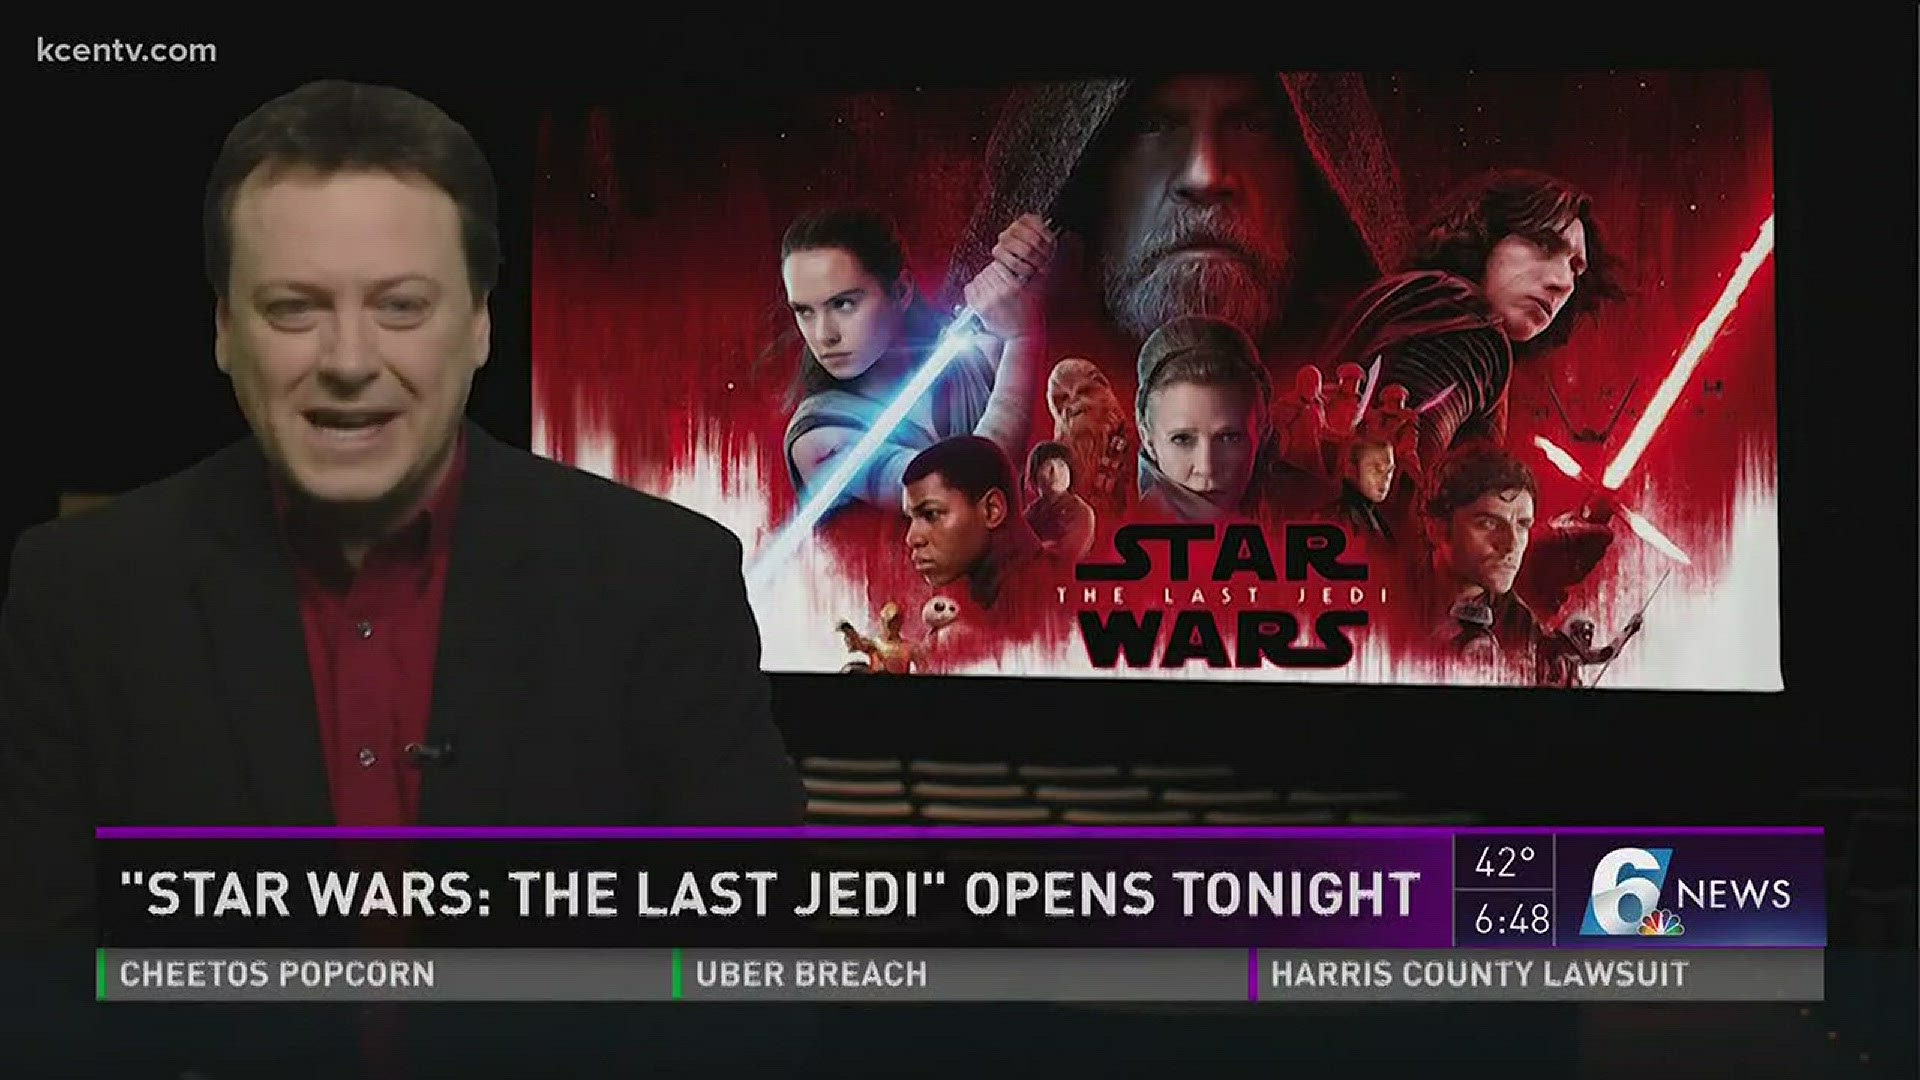 The Last Jedi is reviewed from The Director's Chair